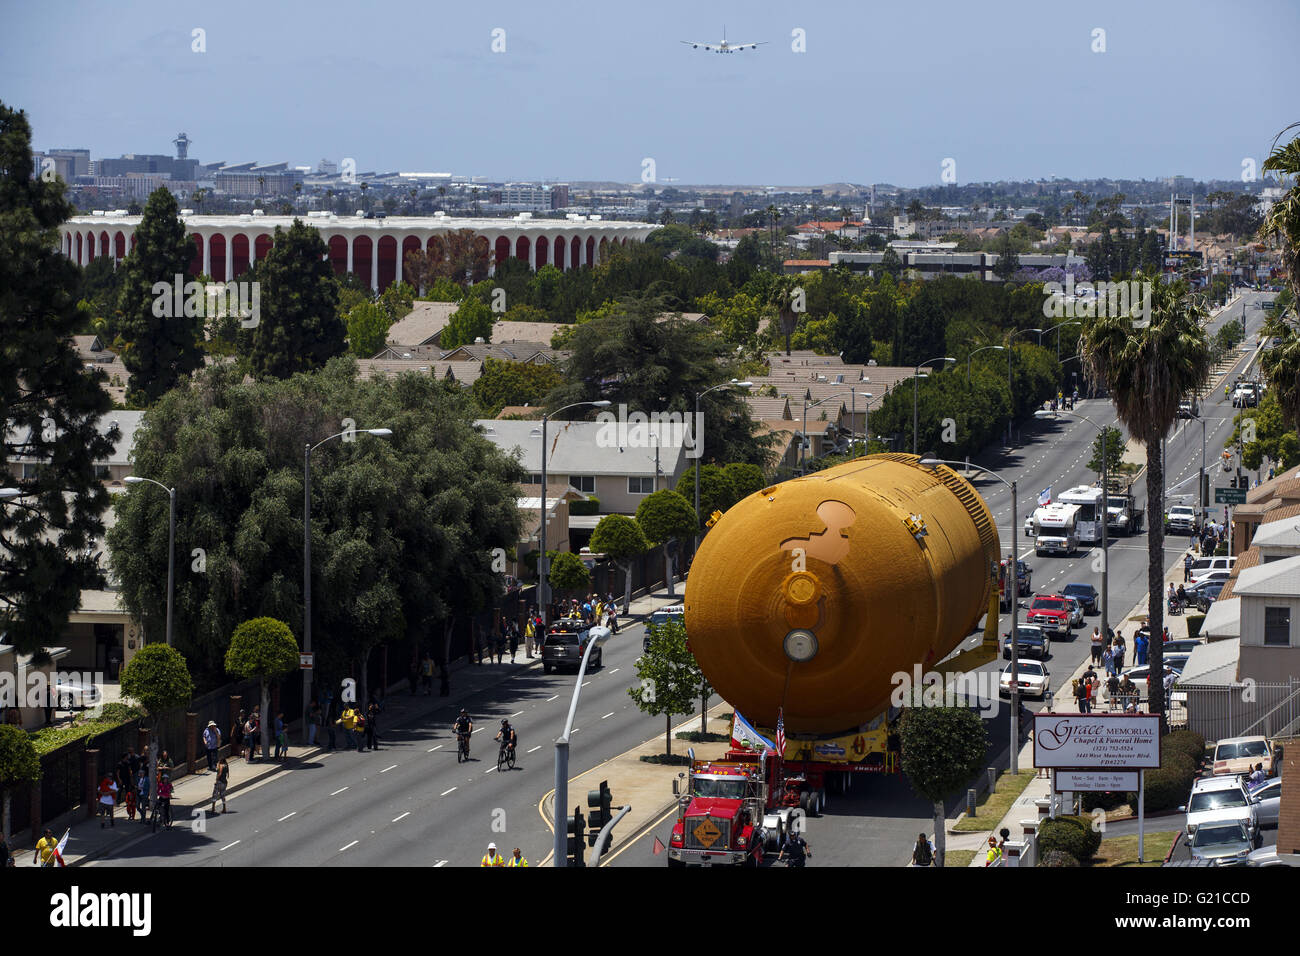 Inglewood, California, USA. 21st May, 2016. The ET-94 fuel tank for the Space Shuttle makes its way on Manchester past The Forum from Marina Del Rey to the California Science Center on Saturday, May 21, 2016 in Inglewood, Calif. NASA's last remaining external fuel tank for the Space Shuttle, ET-94, traveled over 16 miles to be united with the Endeavor, where the 66,000 pound fuel tank will be displayed like it is ready to launch. © 2016 Patrick T. Fallon © Patrick Fallon/ZUMA Wire/Alamy Live News Stock Photo